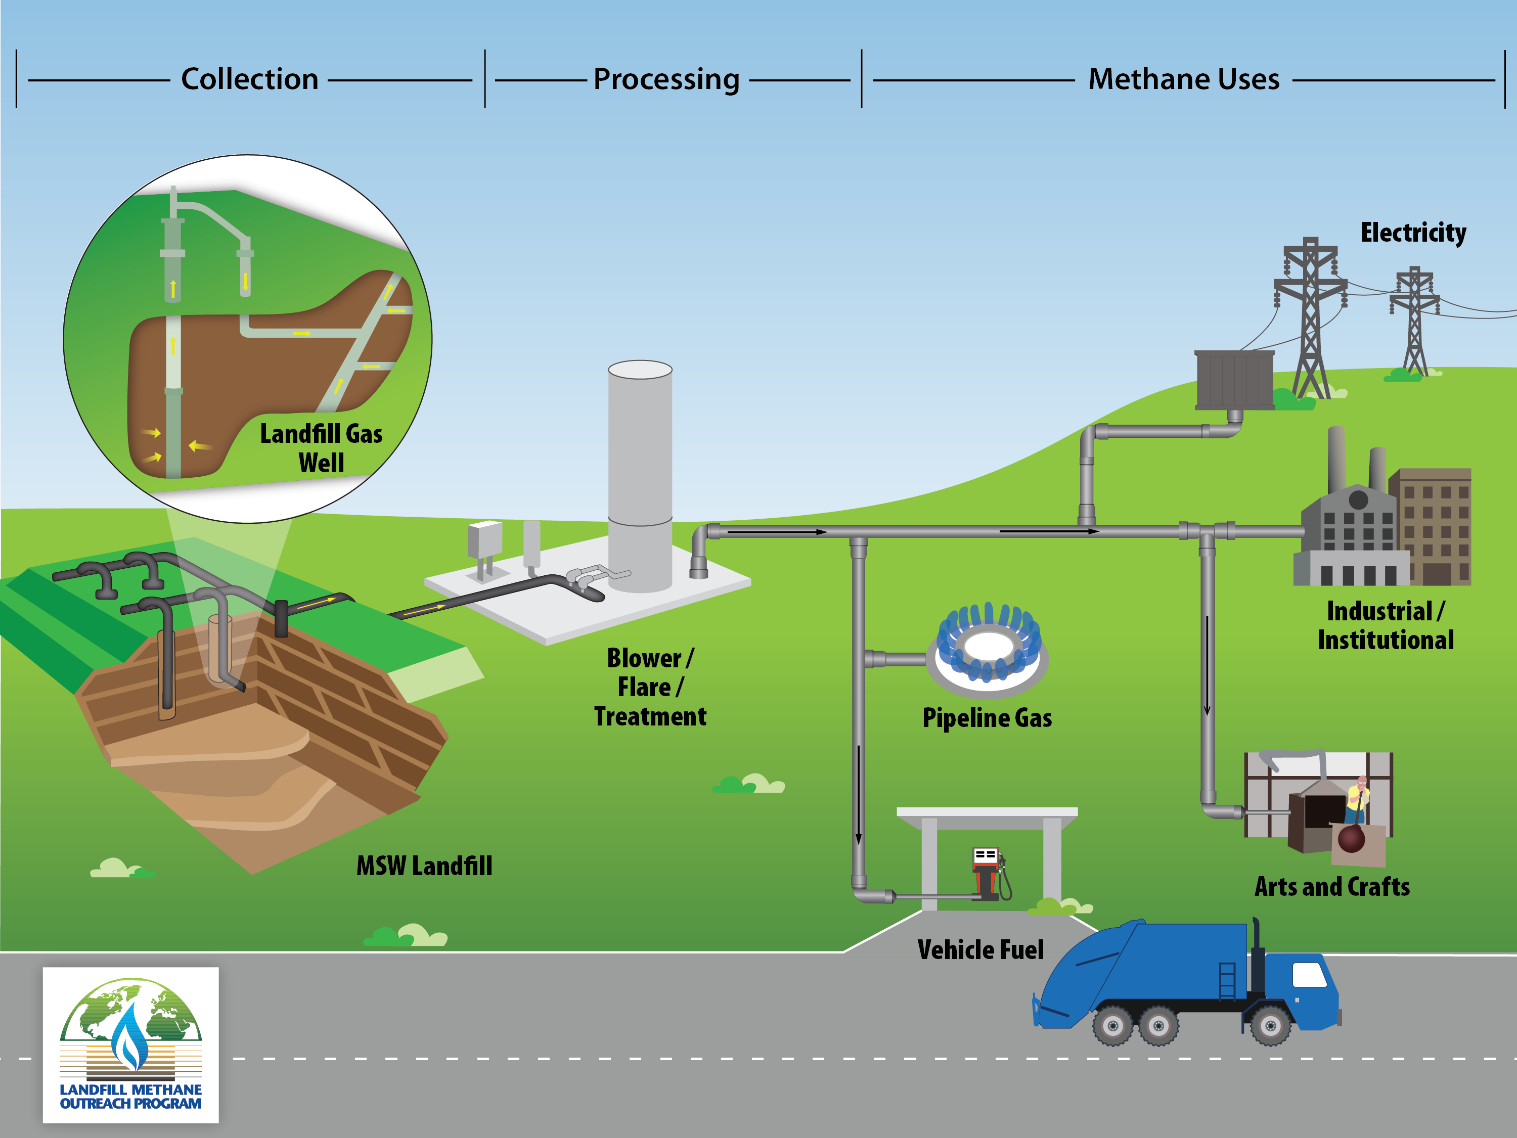 Capturing methane emissions from landfills